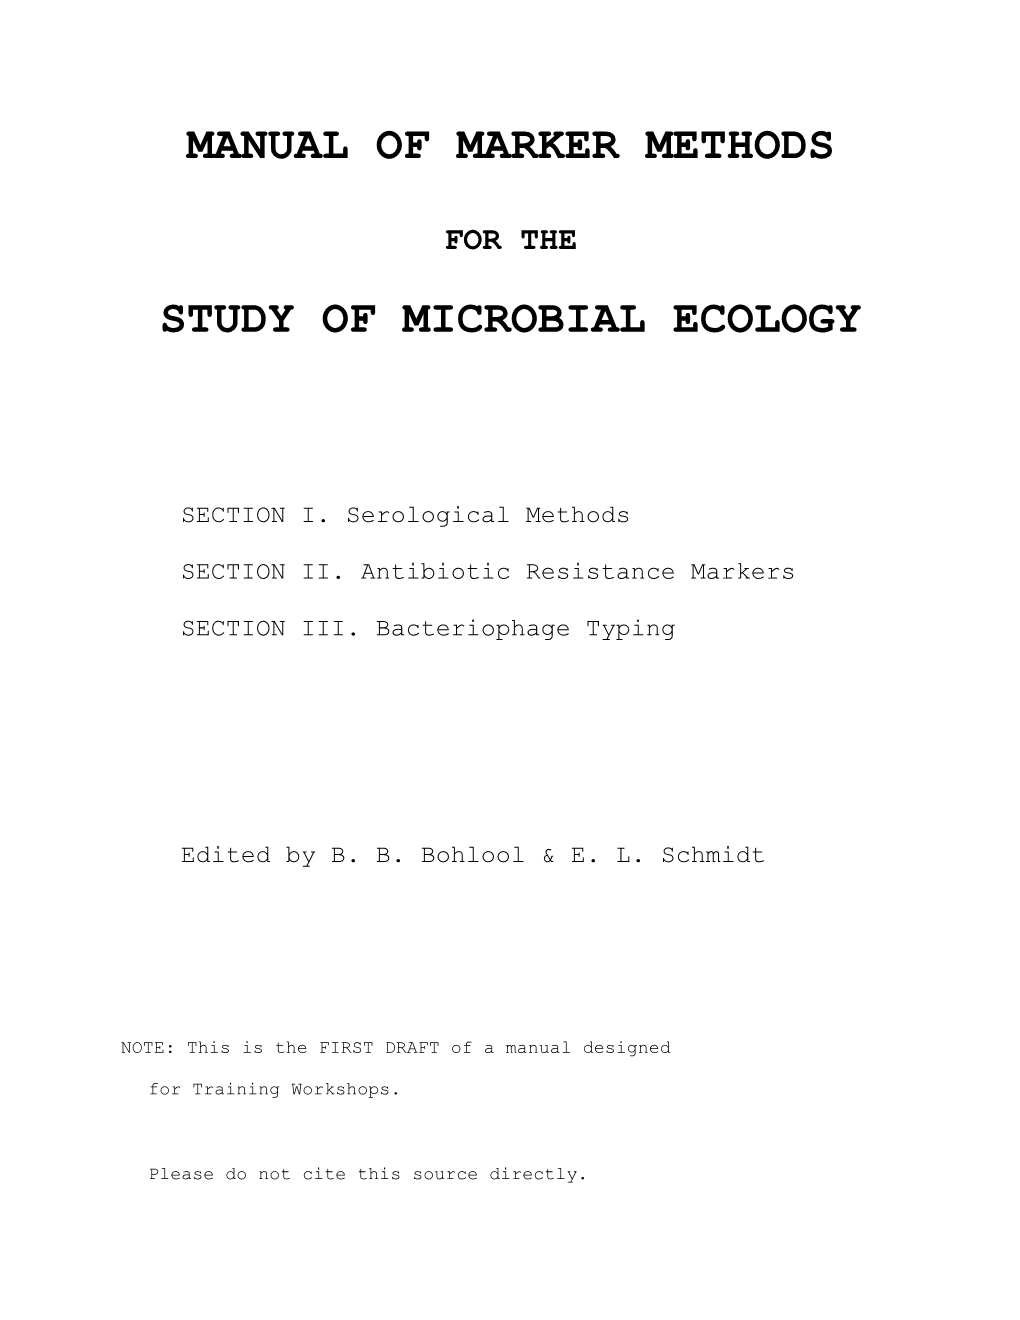 Study of Microbial Ecology